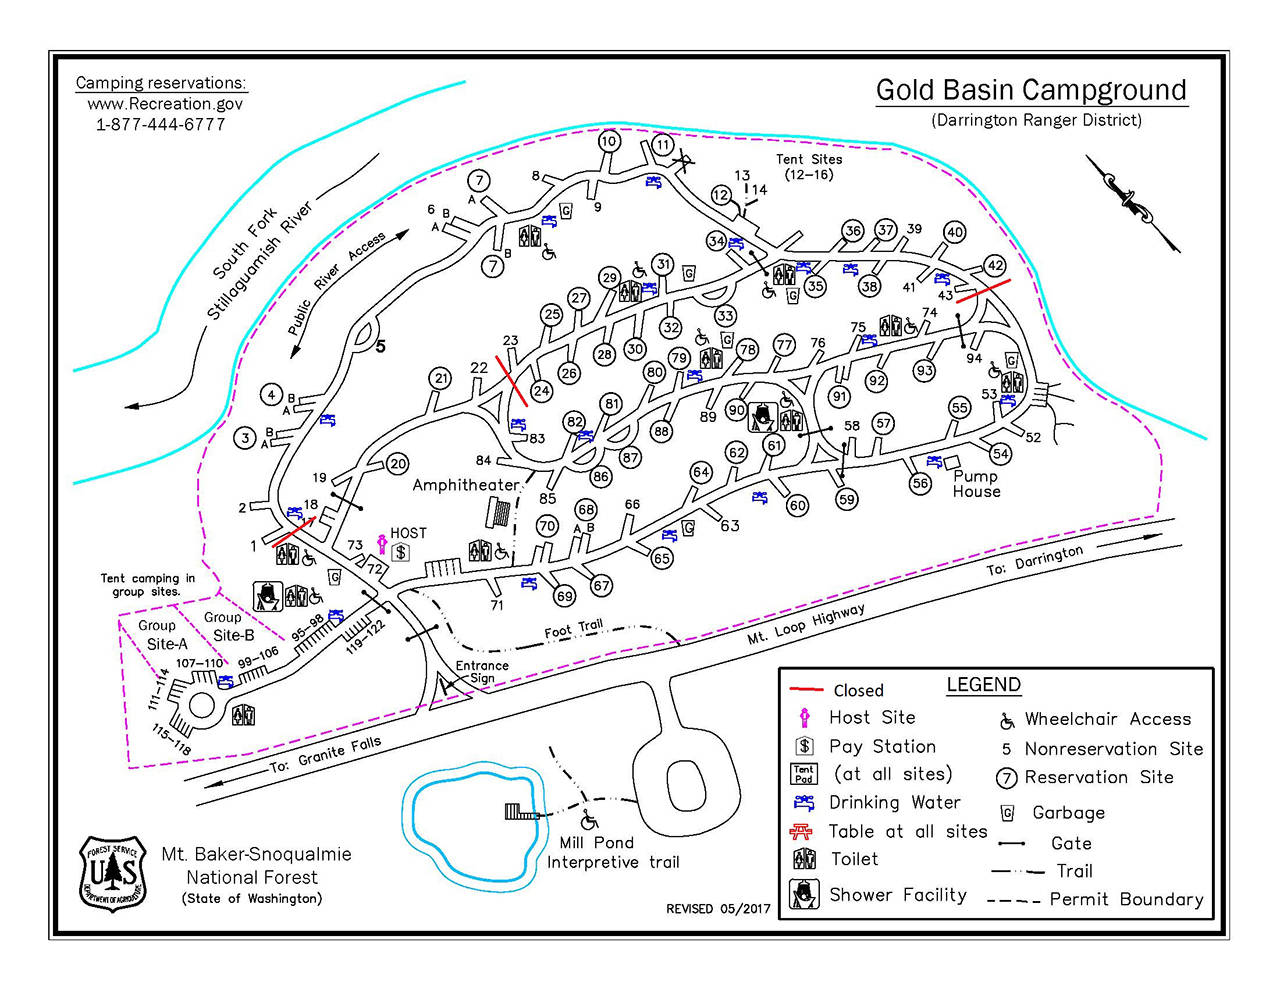 Closed for 5 years, Gold Basin Campground is open again | HeraldNet.com